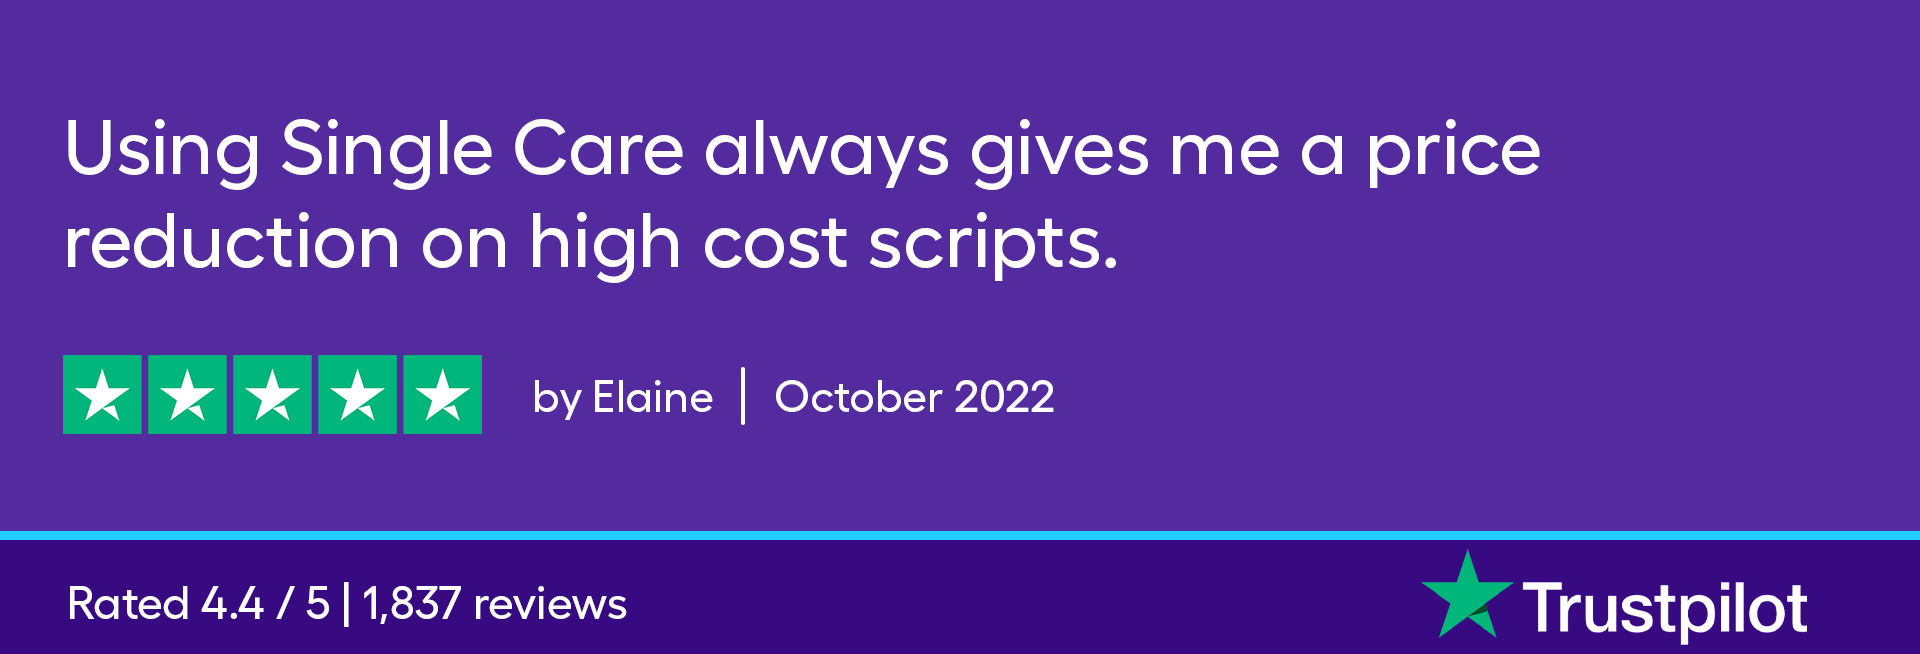 Using Single Care always gives me a price reduction on high cost scripts.